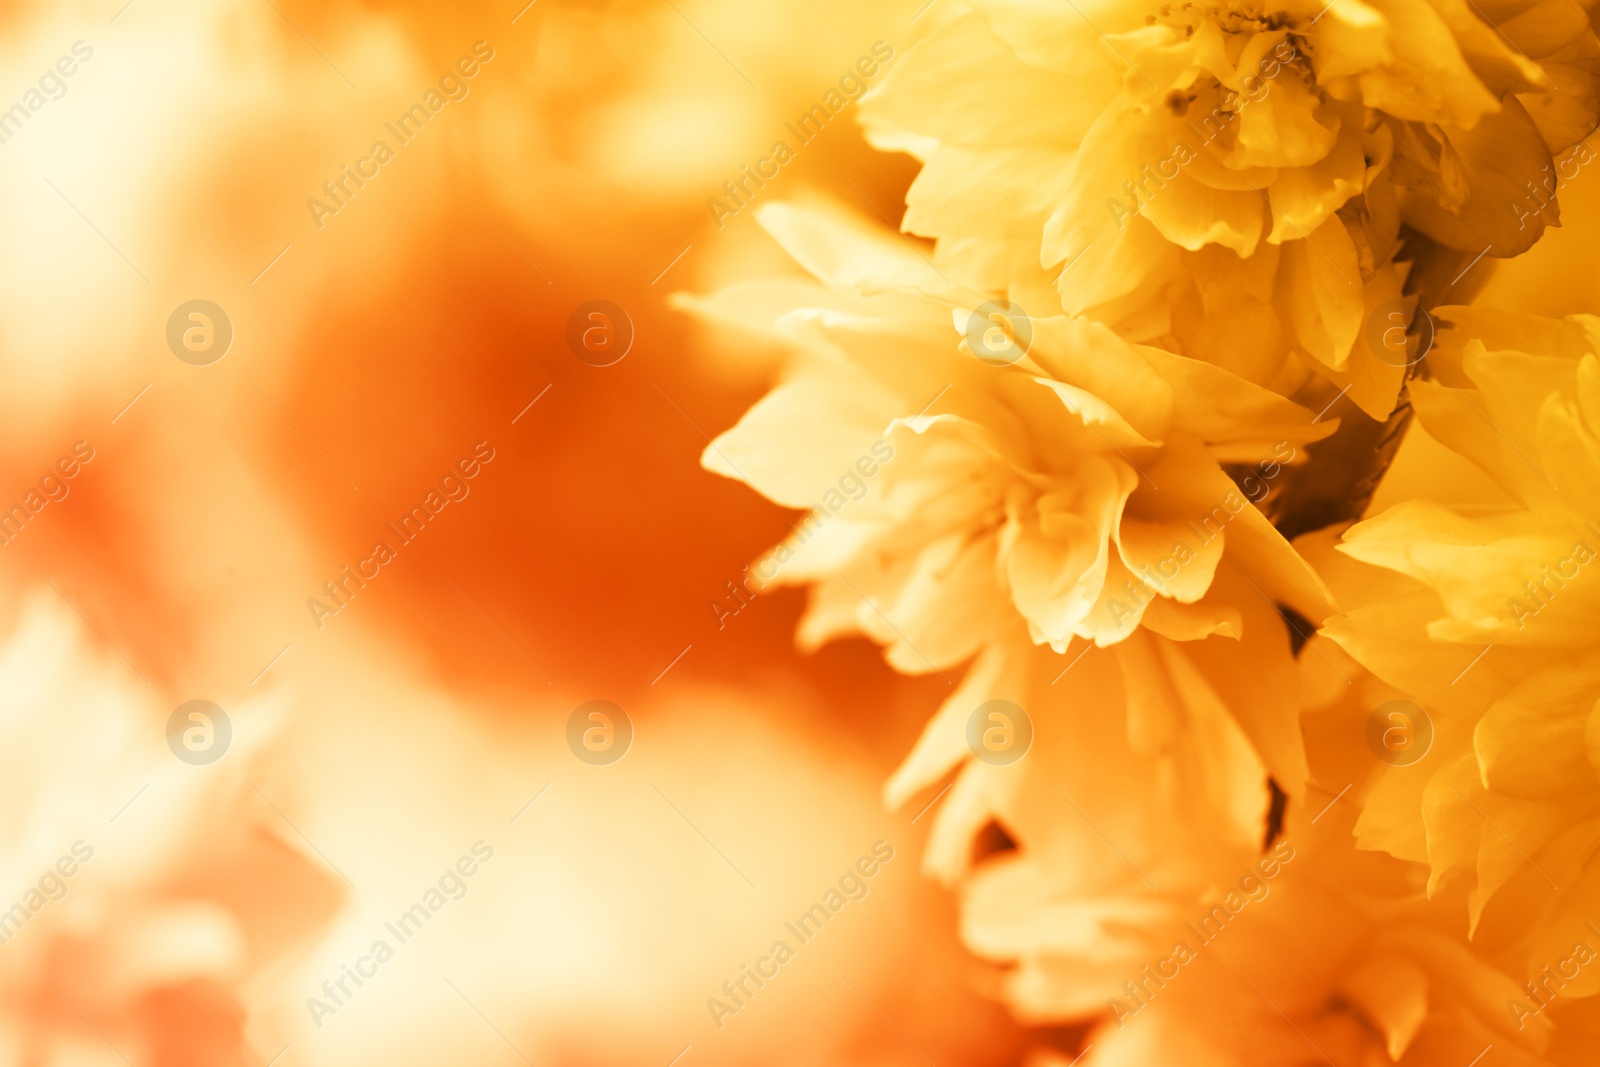 Image of Beautiful blossom on blurred background, closeup. Toned in orange